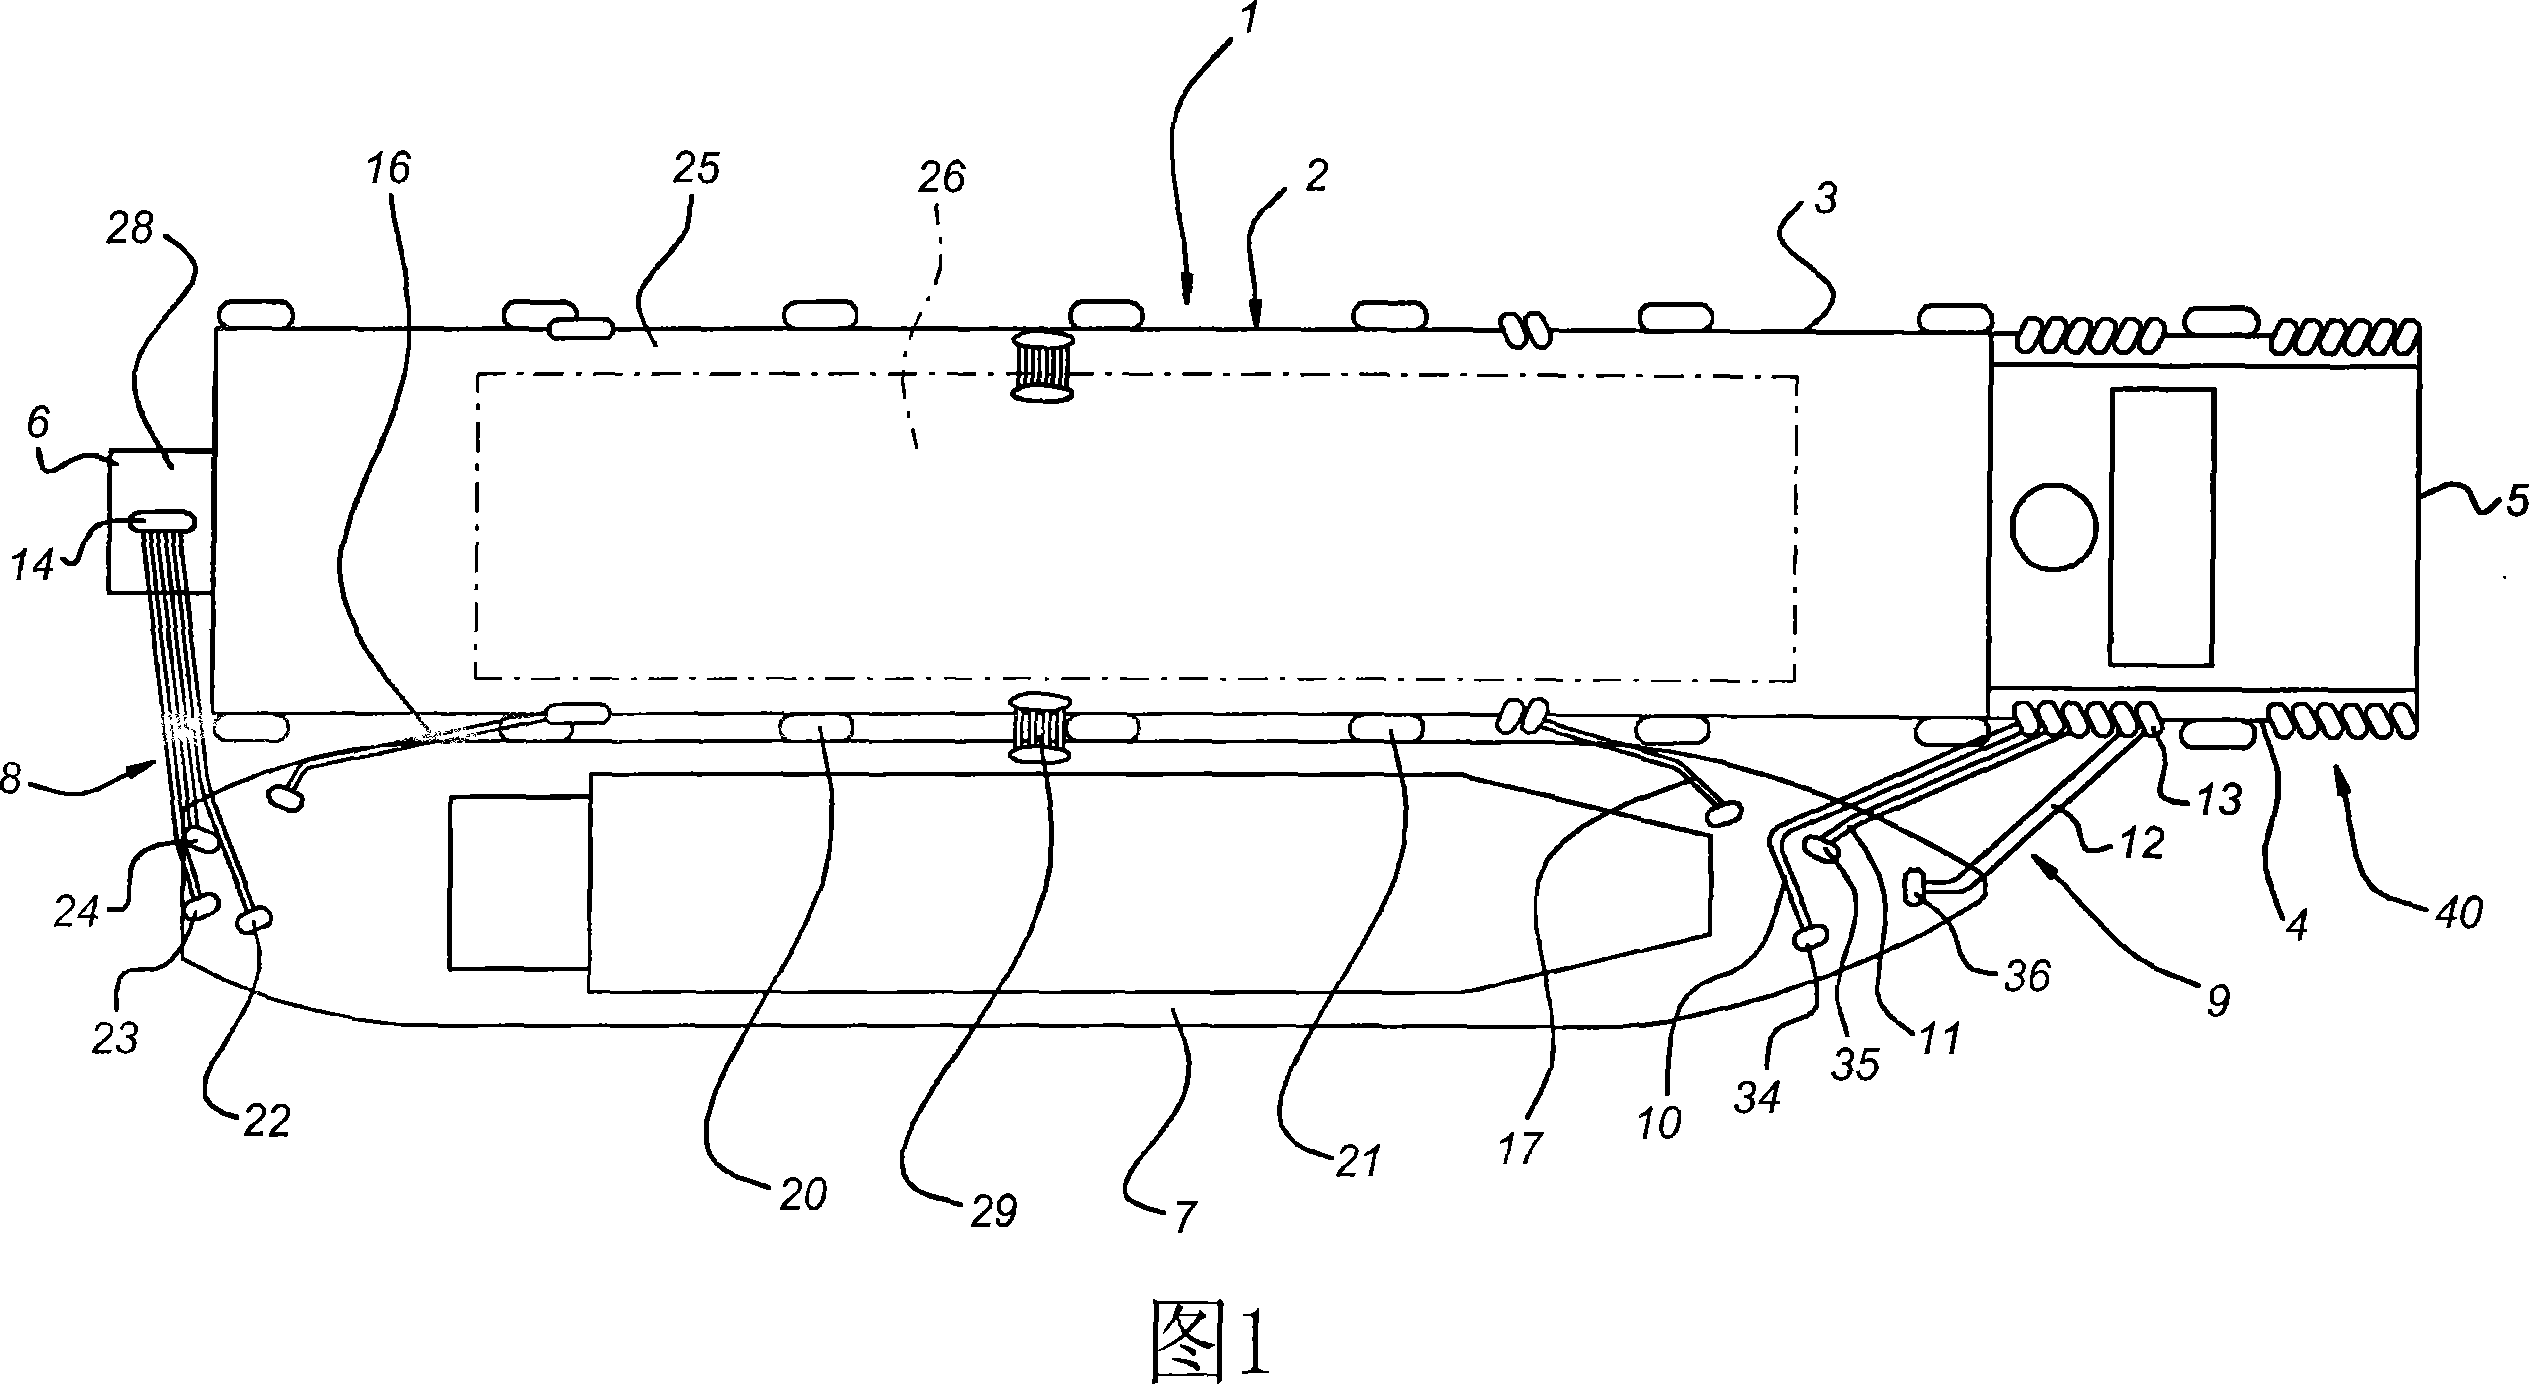 Enhanced side-by-side mooring construction